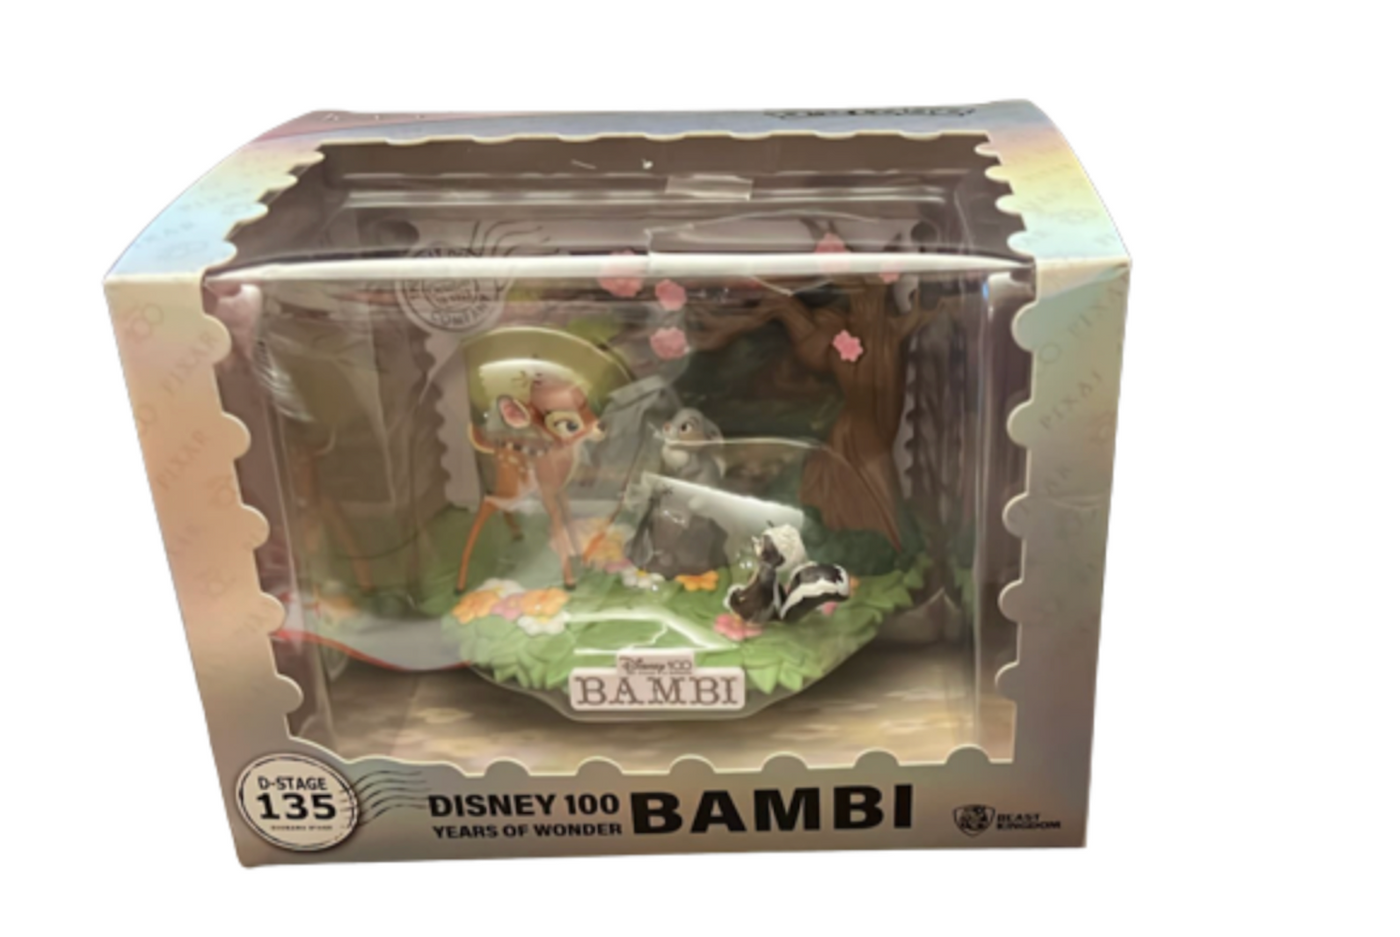 Disney 100 Years of Wonder Bambi DS-135 D-Stage Statue Figurine New with Box